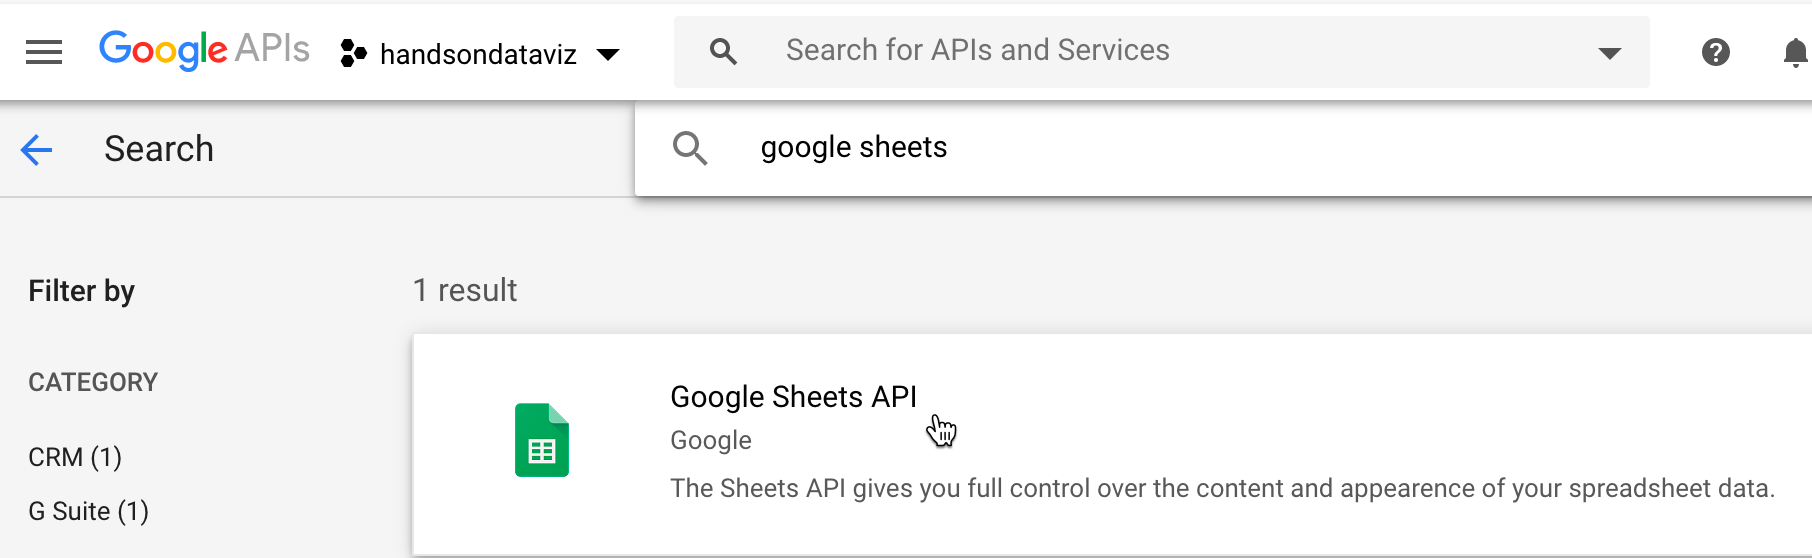 Search for Google Sheets and select this result.